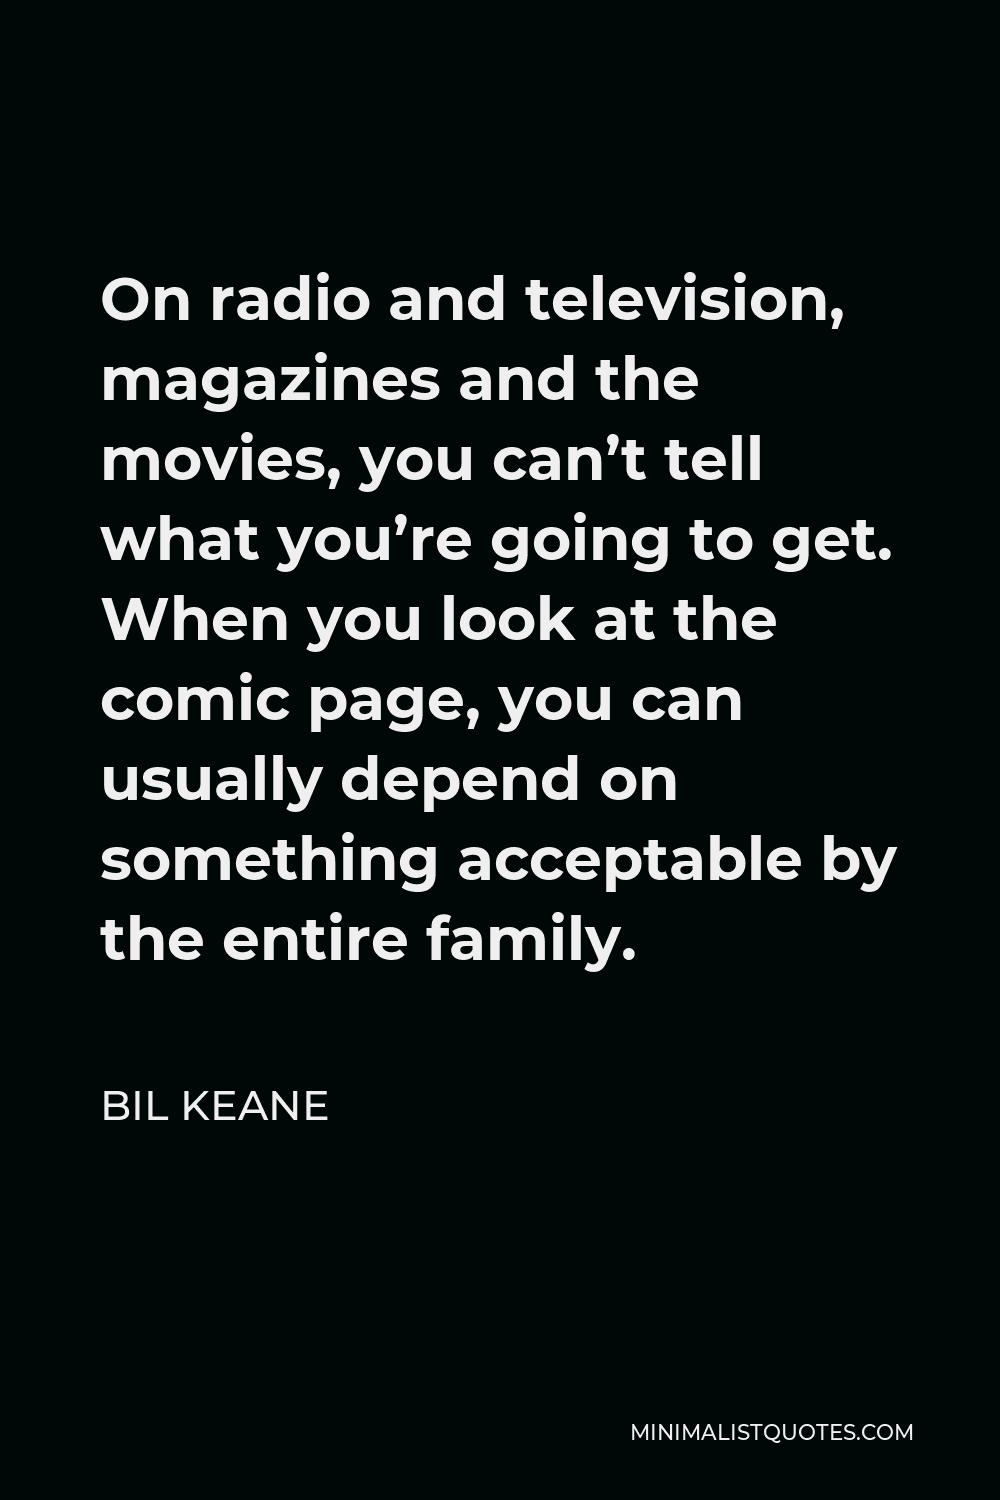 Bil Keane Quote - On radio and television, magazines and the movies, you can’t tell what you’re going to get. When you look at the comic page, you can usually depend on something acceptable by the entire family.